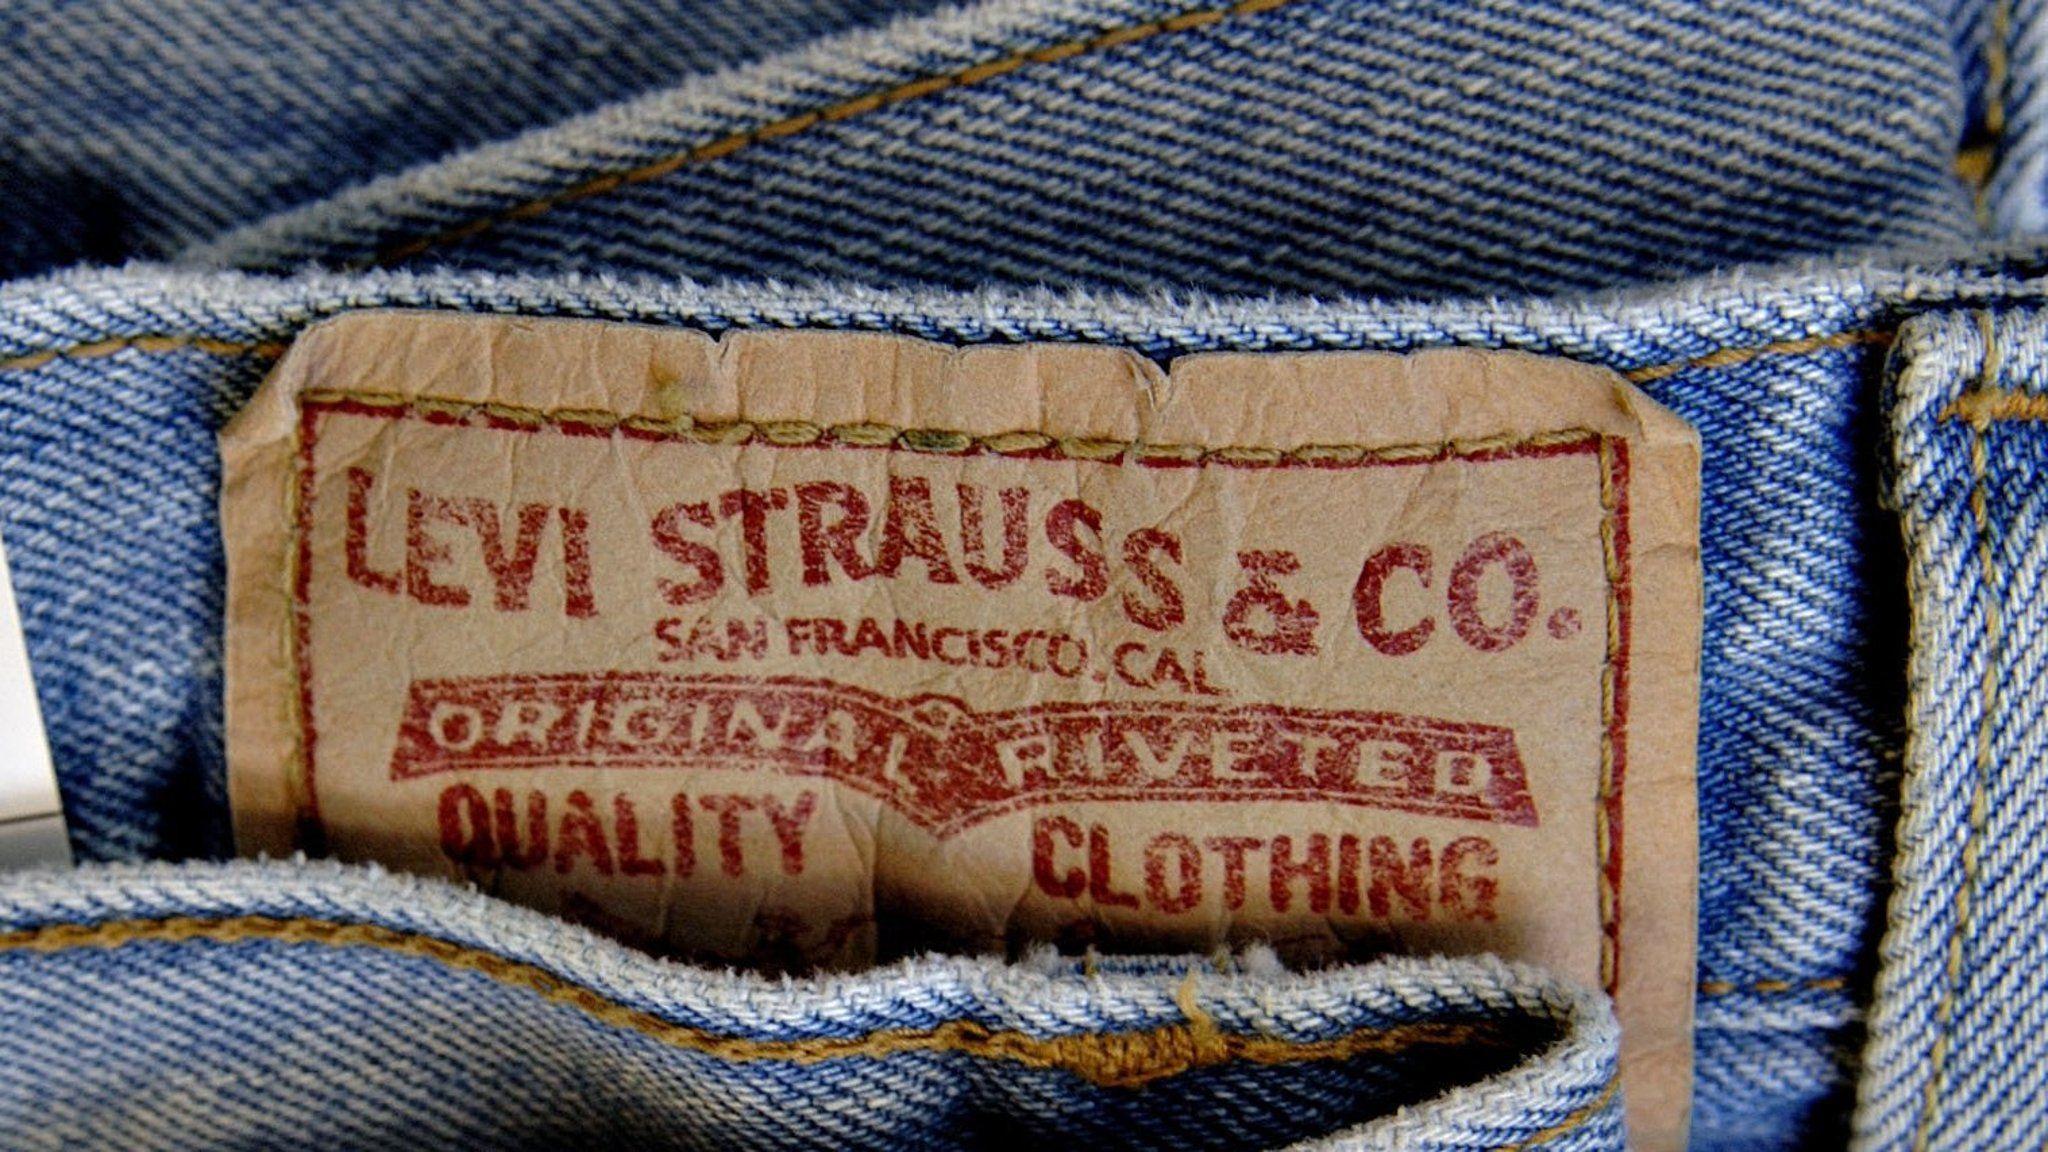 Levi Strauss to replace workers with lasers